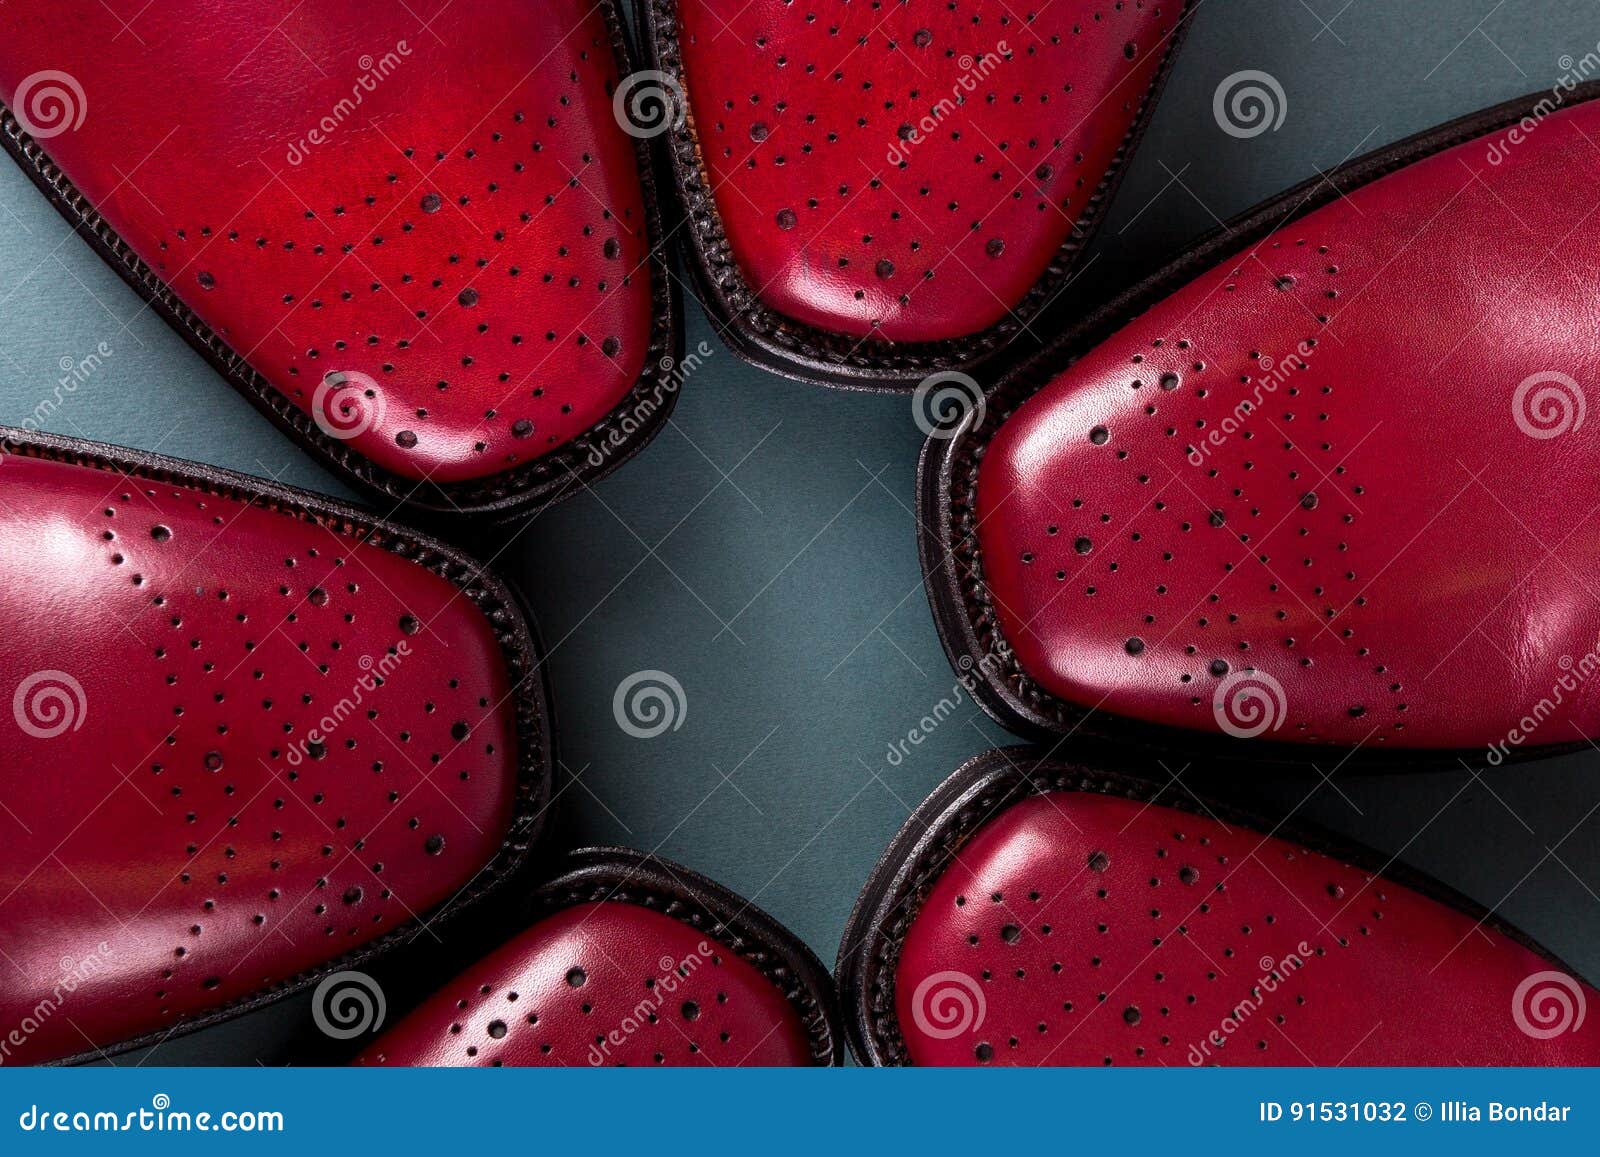 Three Pair Brogues in a Circle. Red Oxford Shoes on Blue Background ...